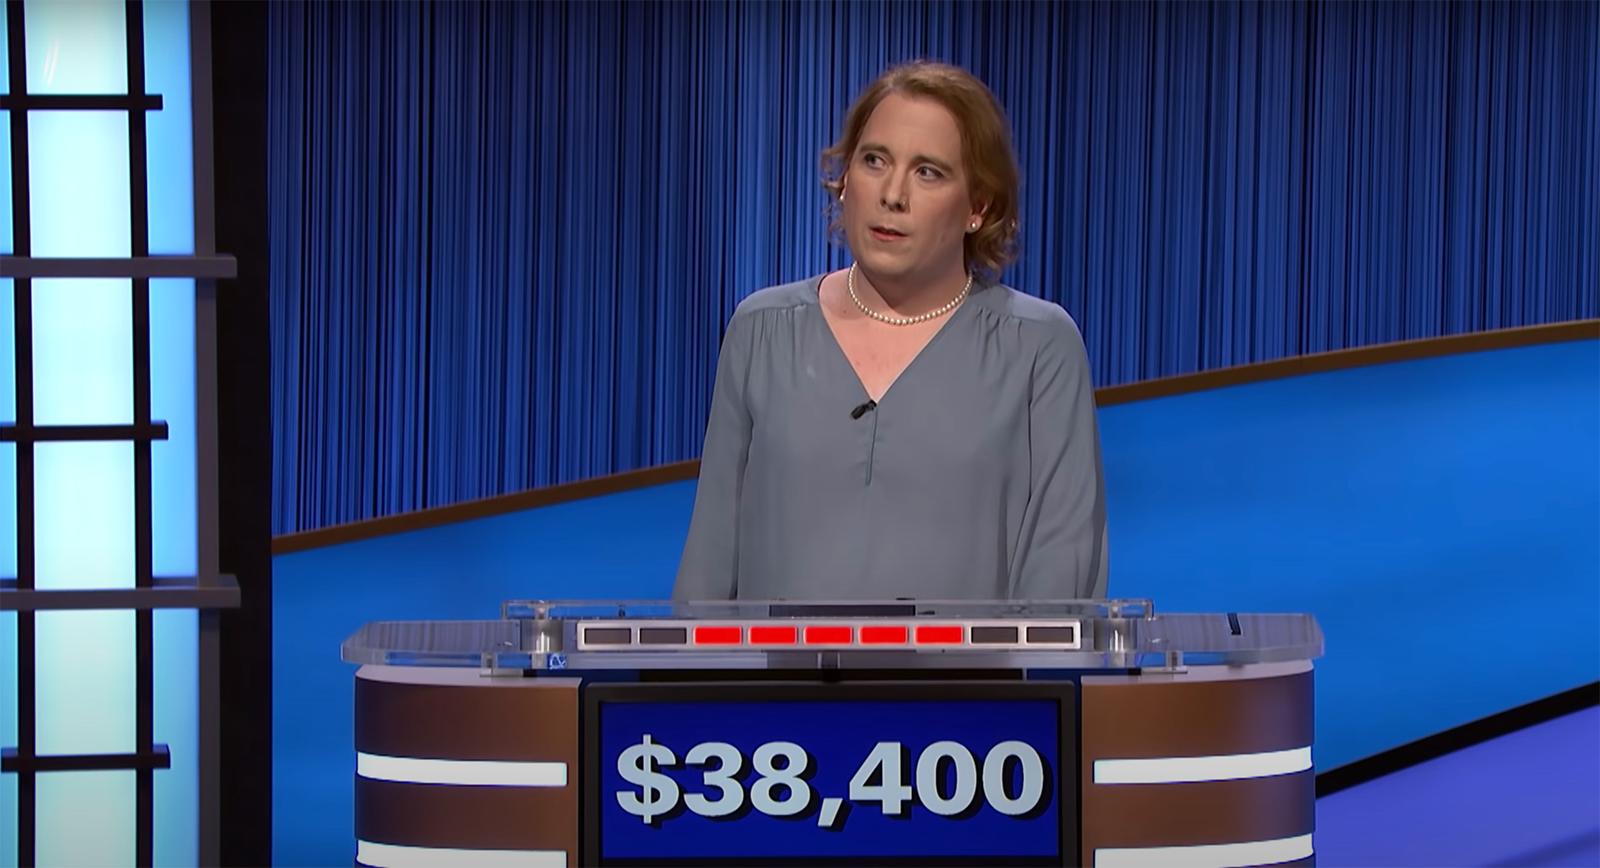 So You’re a Mixed Knowledge Brainiac? Prove It by Getting at Least 18/24 on This Quiz Jeopardy